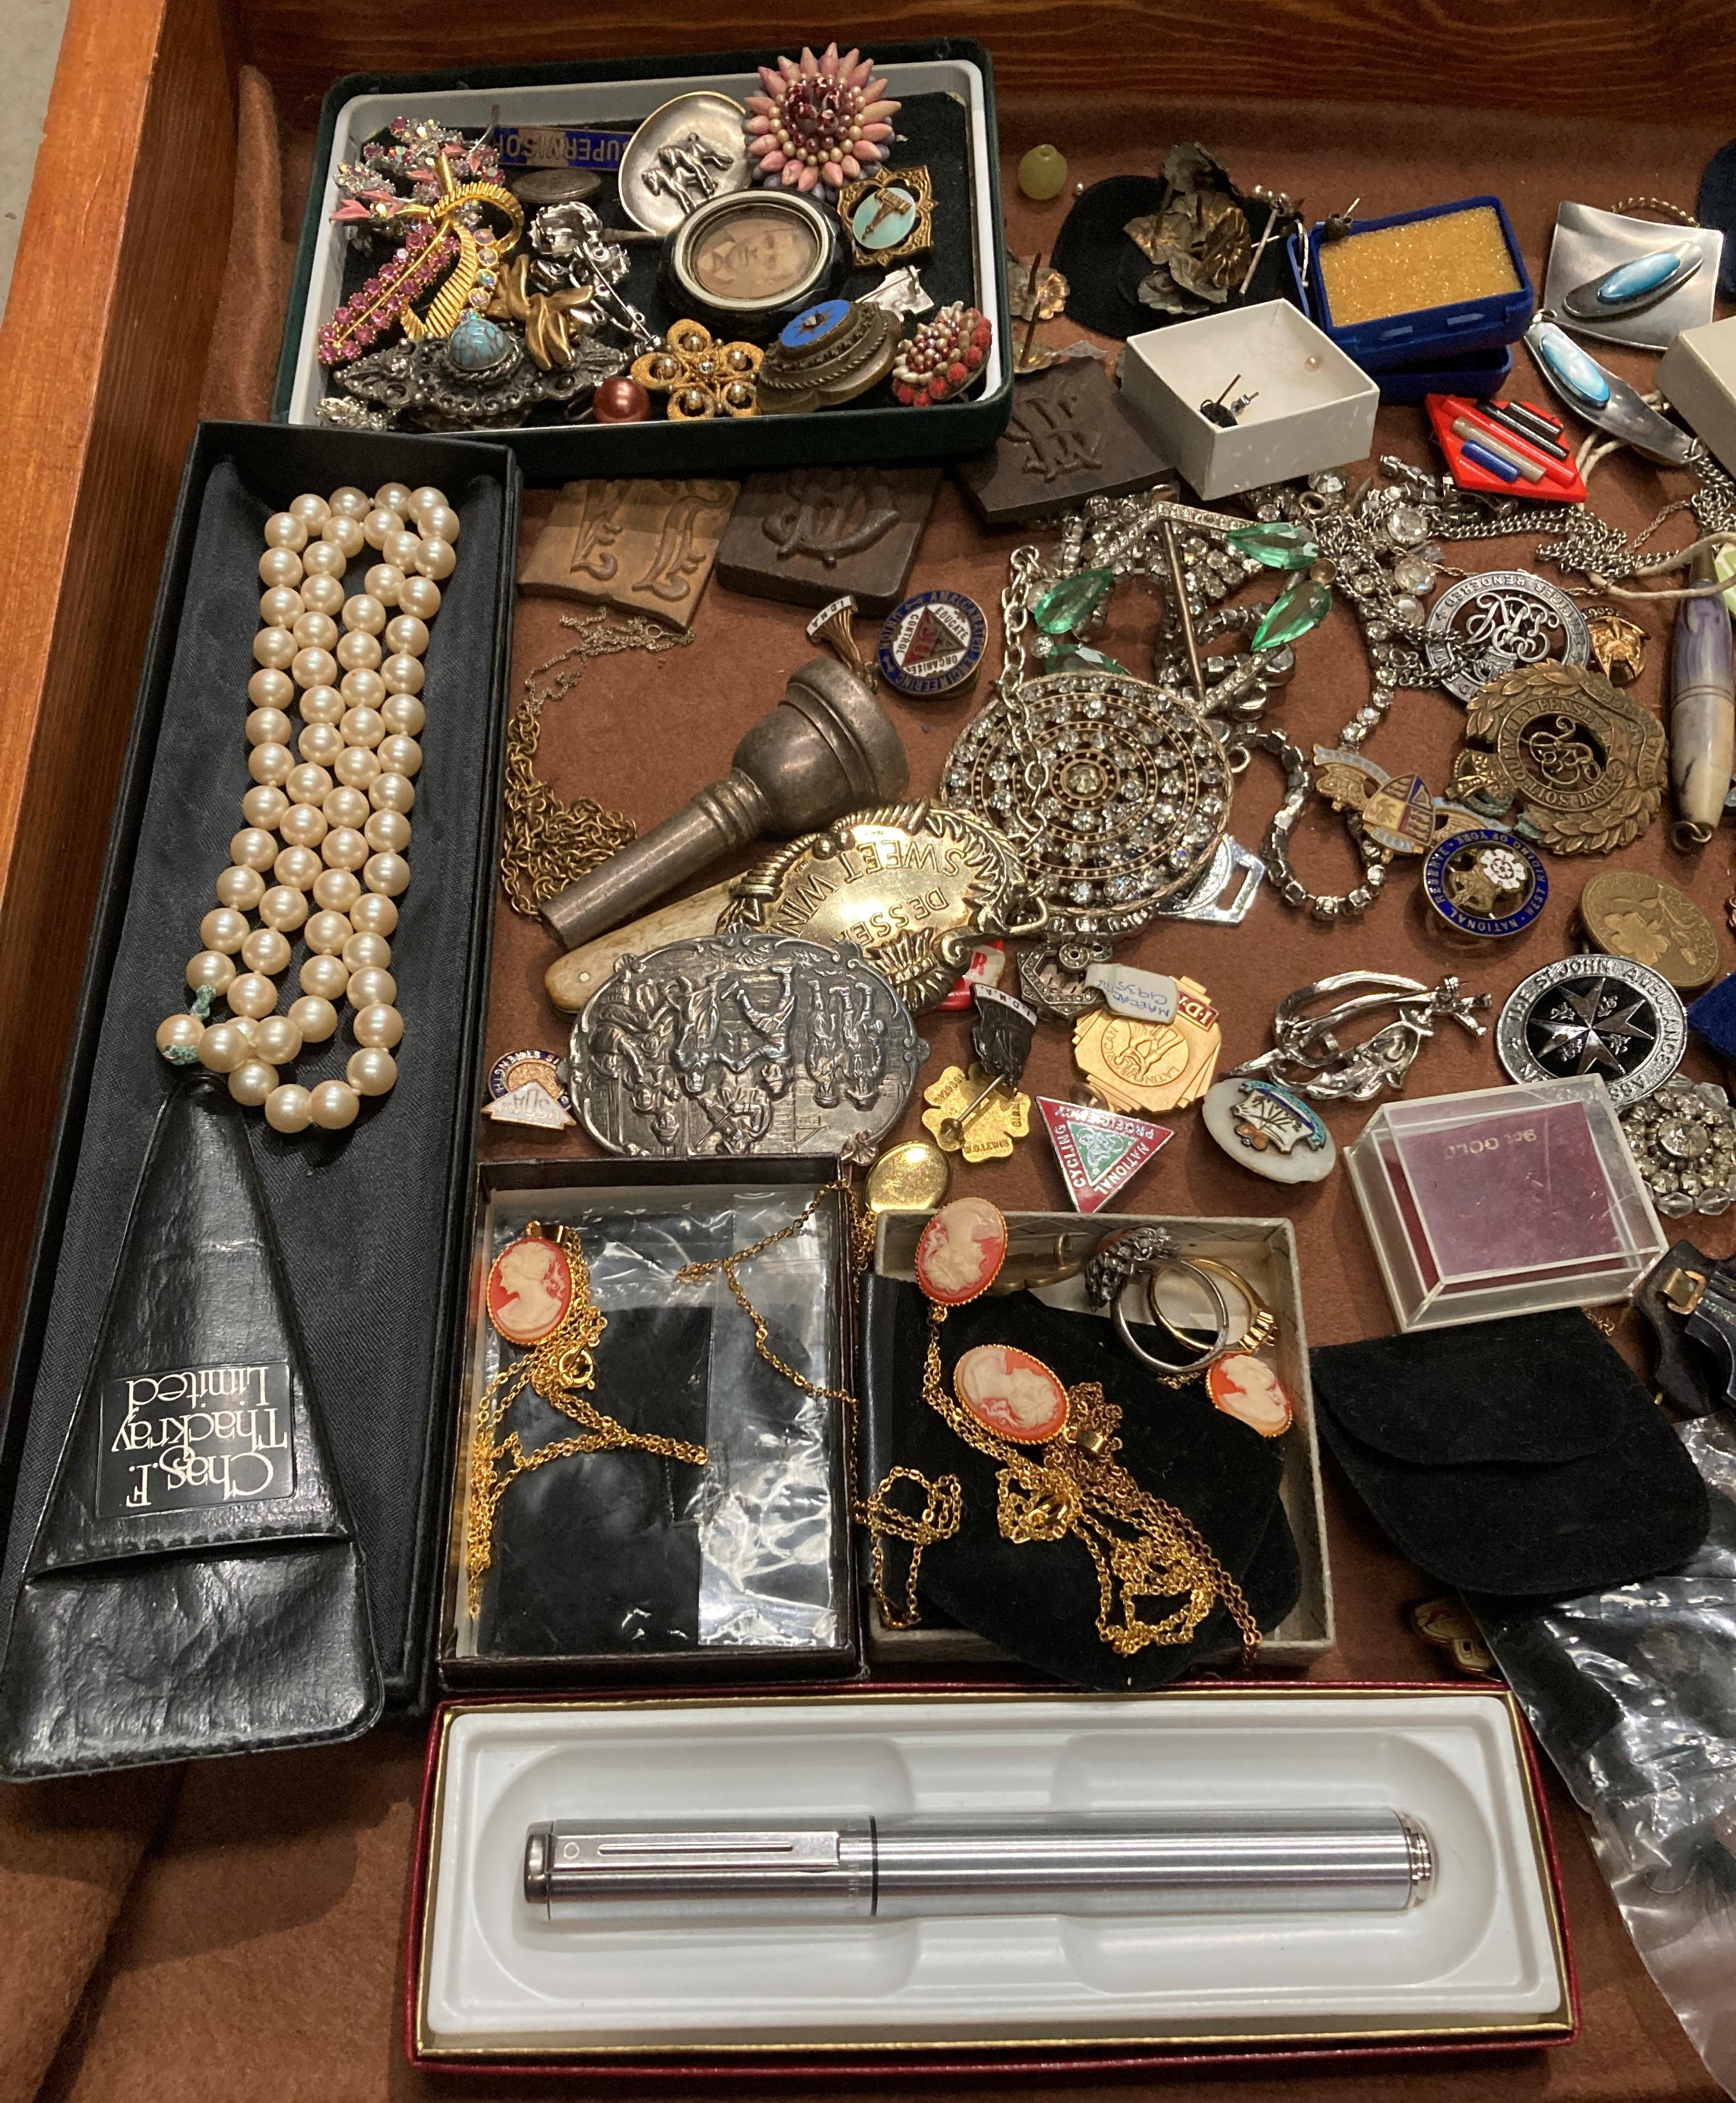 Sloped glass-top display cabinet (46 x 46cm) and contents - assorted vintage brooches, badges, - Image 2 of 3